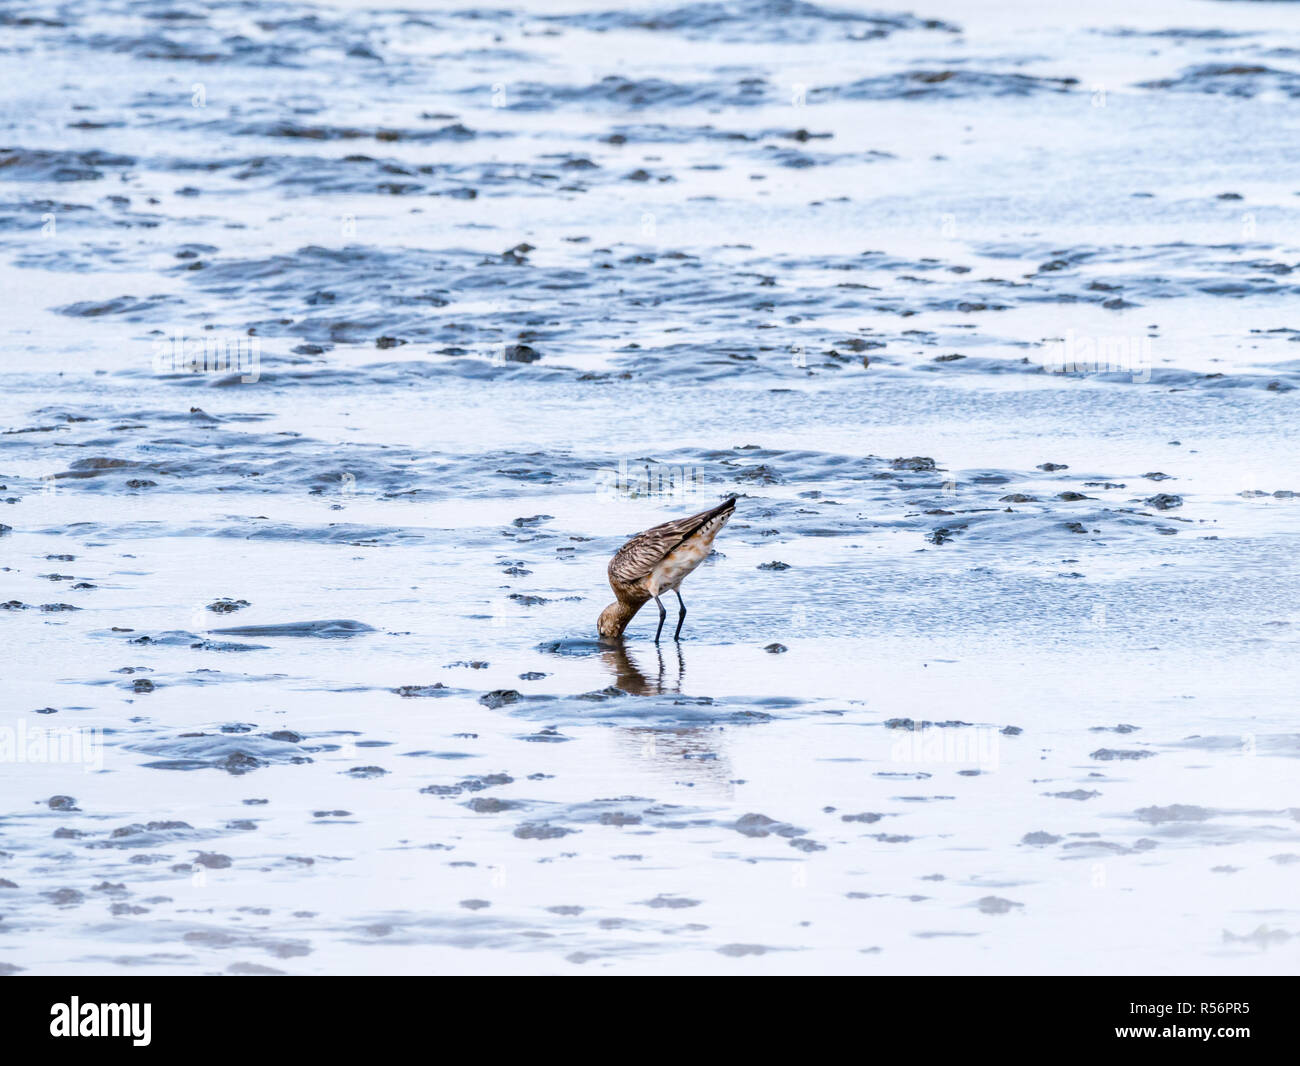 Adult bar-tailed godwit, Limosa lapponica, feeding on mud flat at low tide of Wadden sea, Netherlands Stock Photo